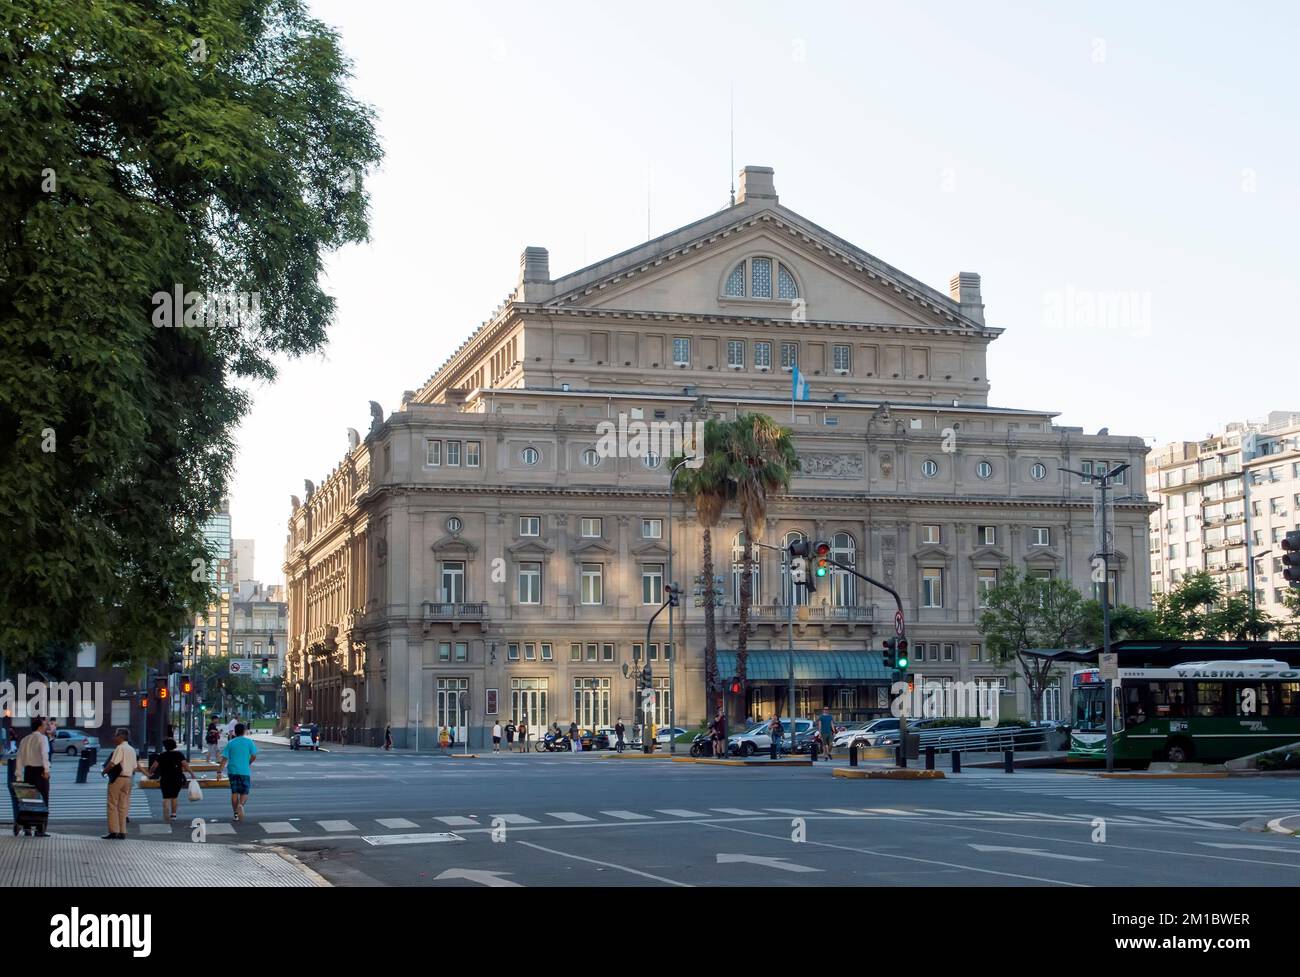 Teatro Colon Opera House and Concert Hall, Buenos Aires, Argentina Stock Photo